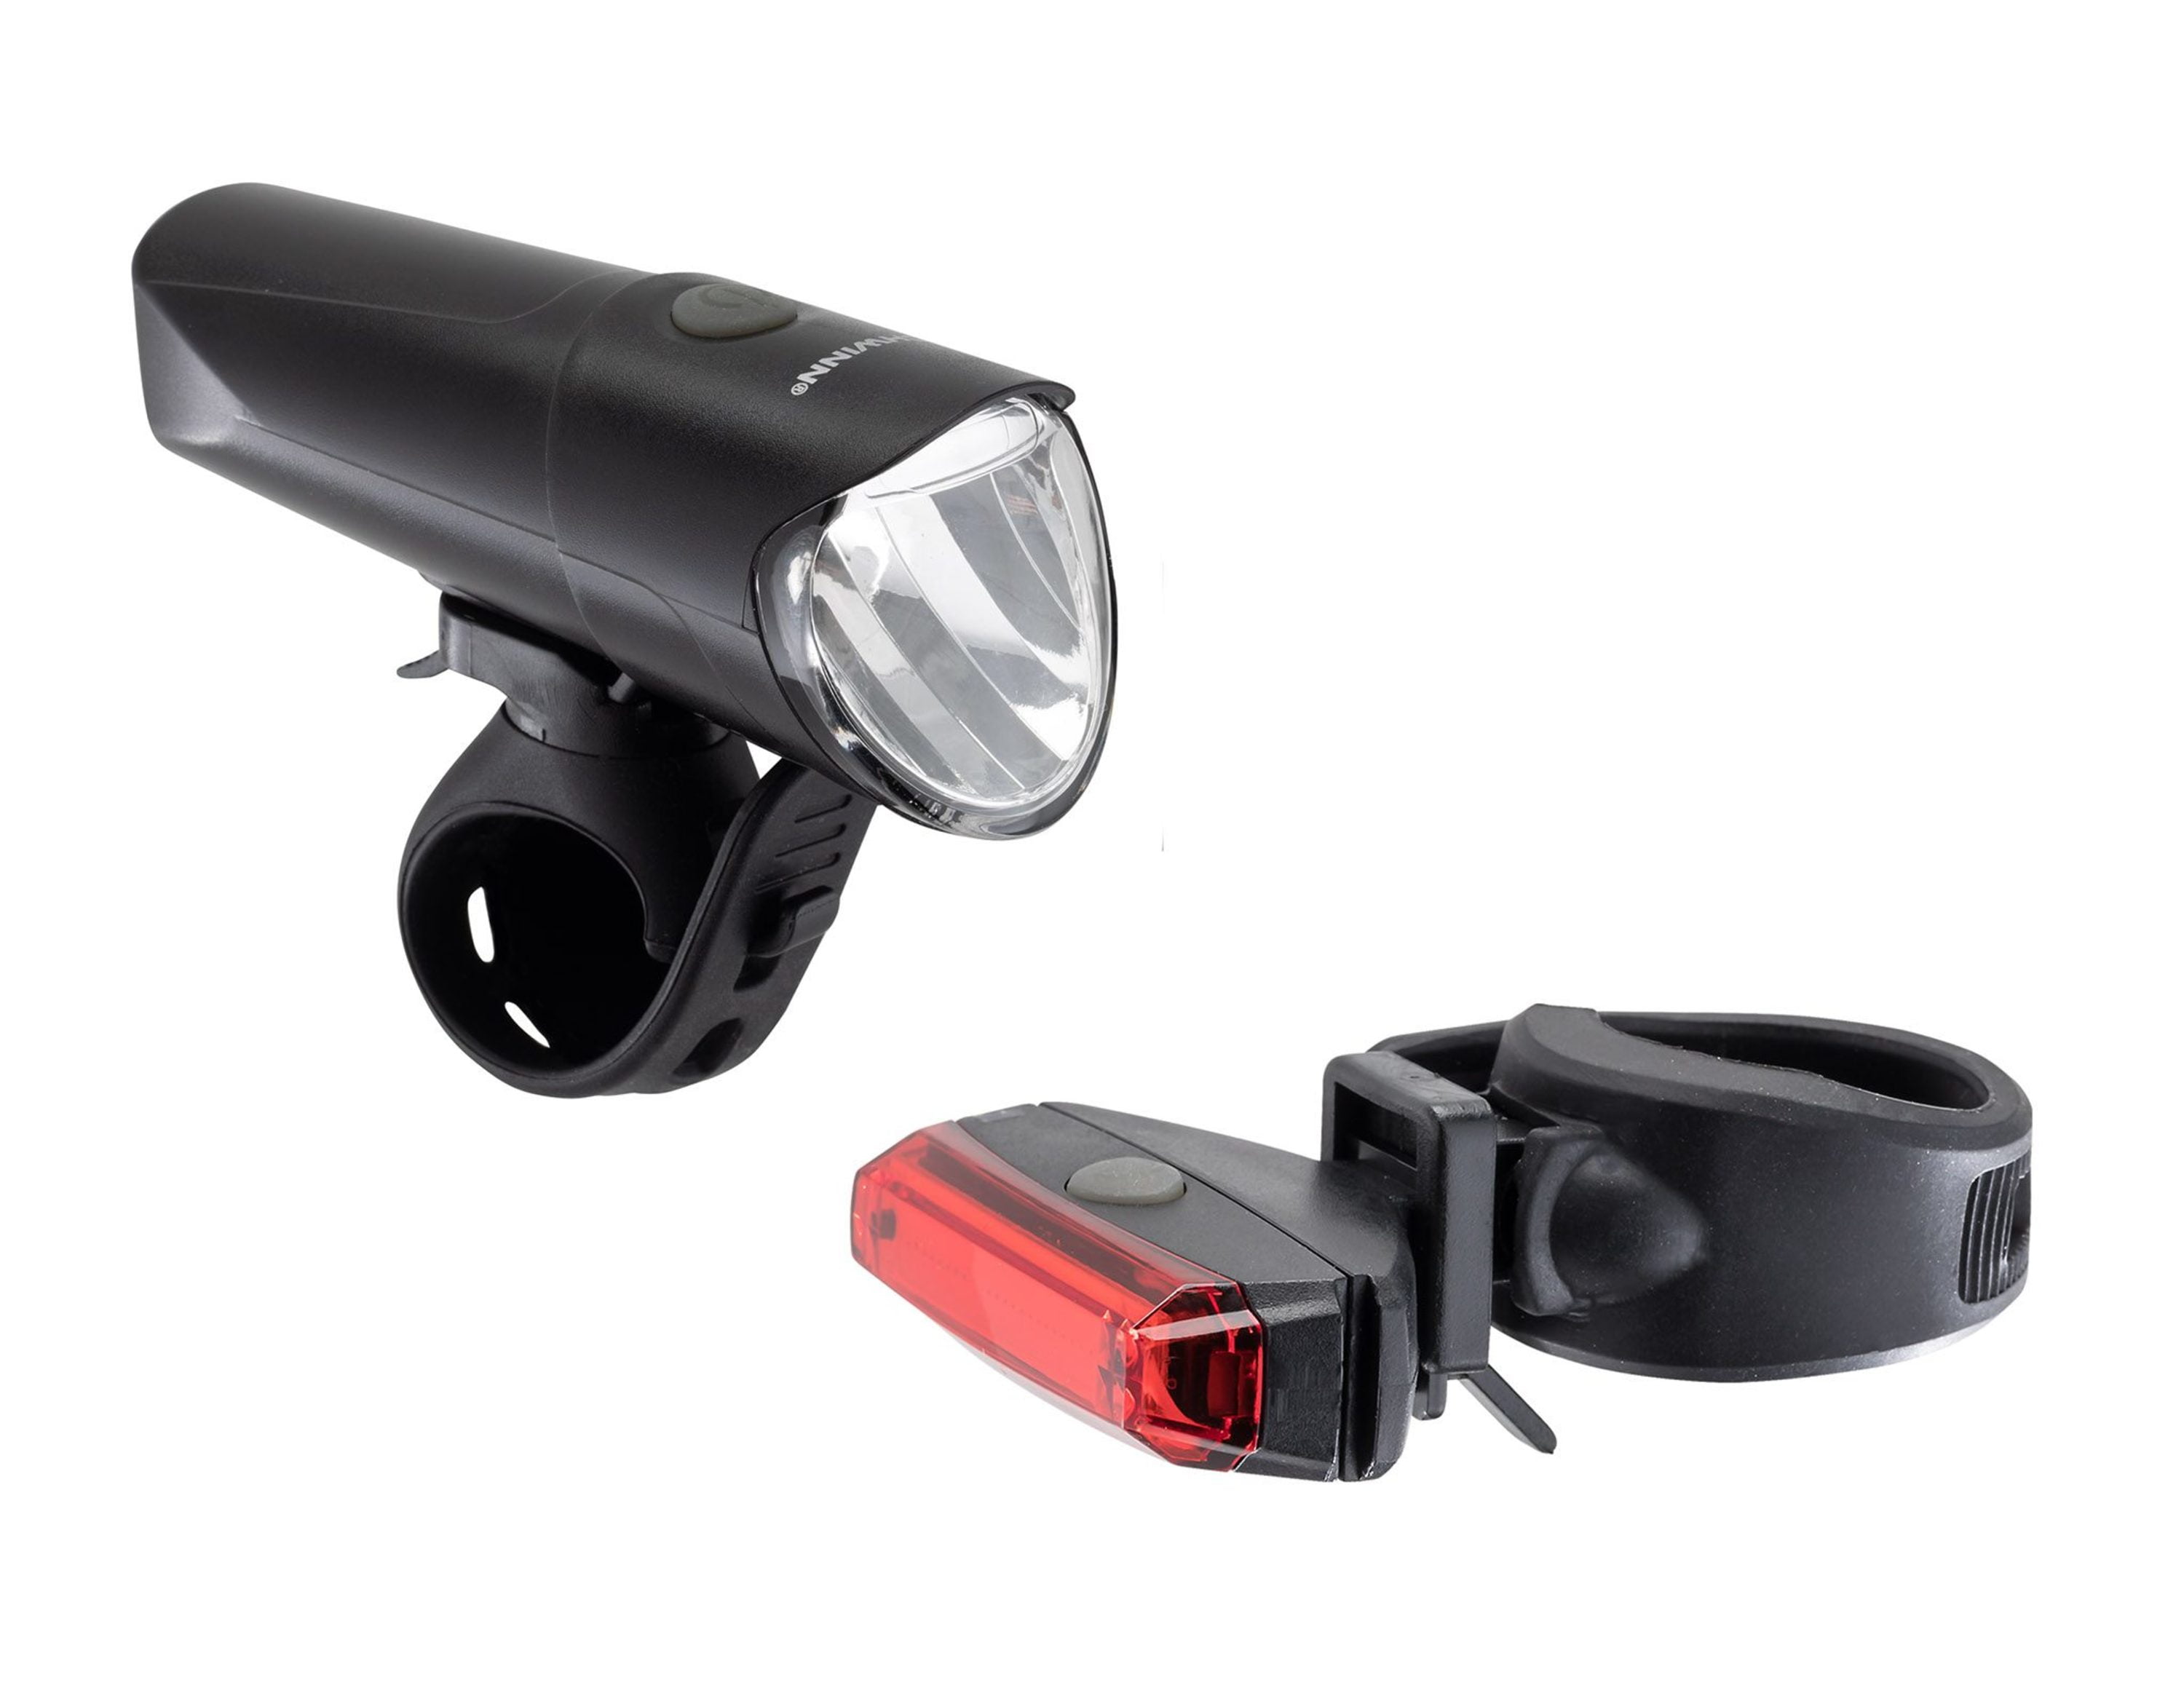 Sonicer Bike Light Waterproof USB Rechargeable Bike Light Set 500 Lumens Super Bright Headlight Front Lights and Back Rear LED 4 Light Modes Fit All Bicycles Mountain Road Bike